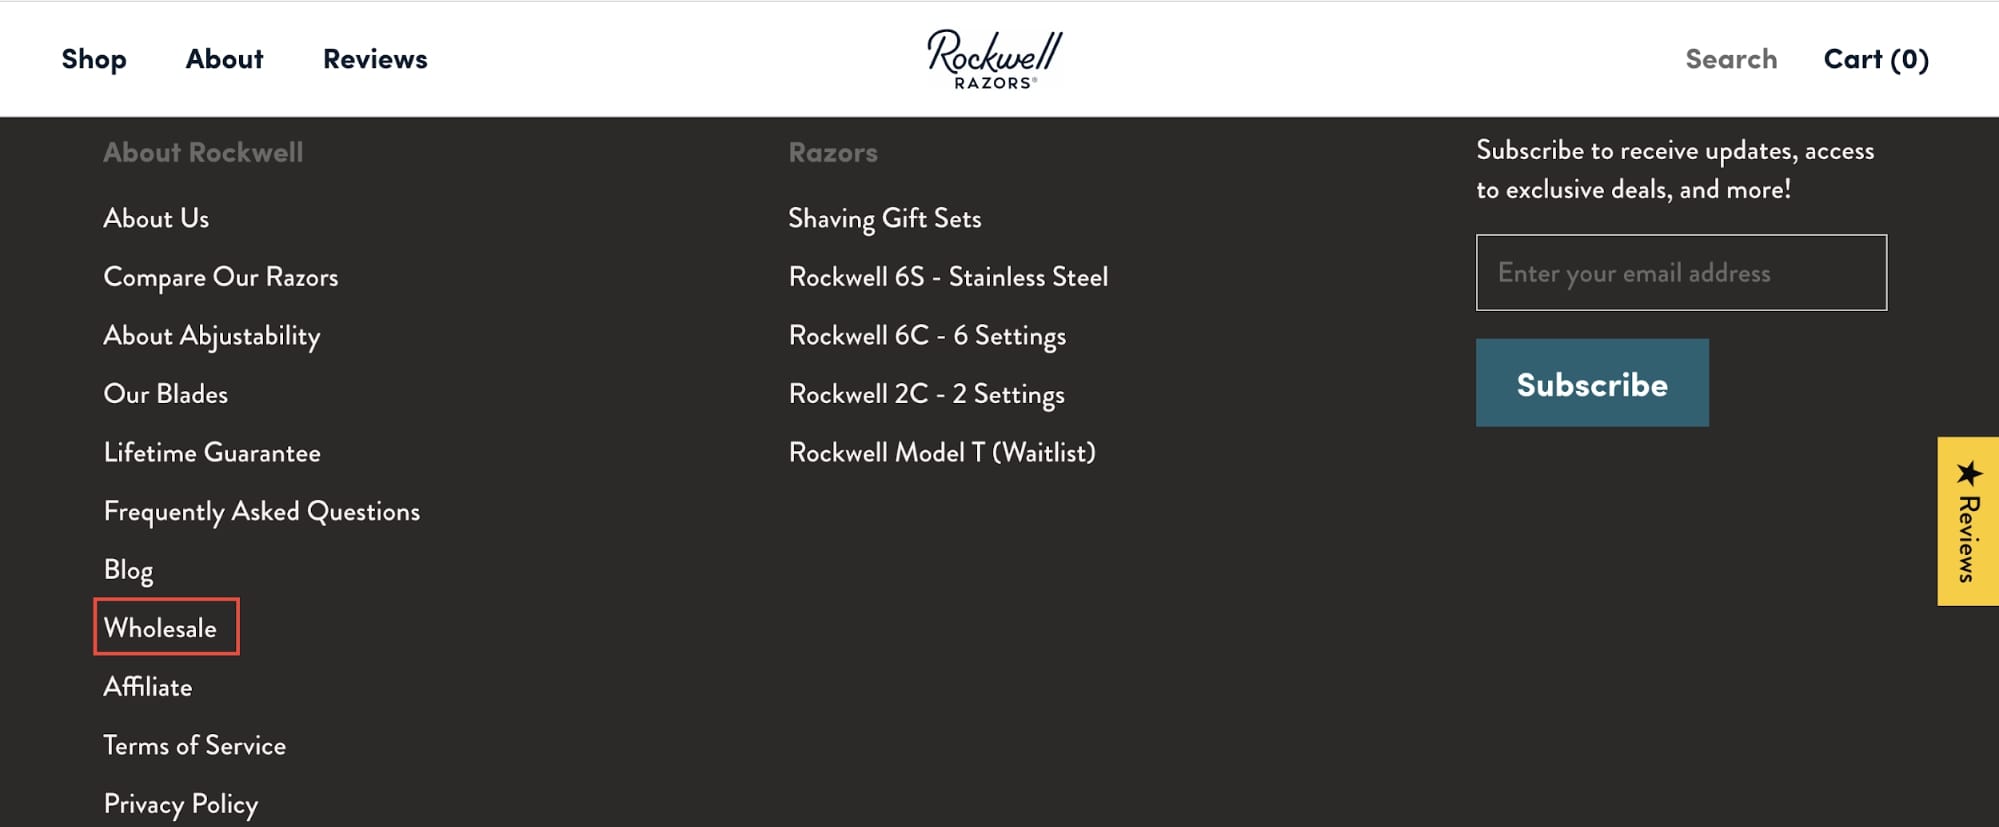 rockwell razors wholesale link in footer